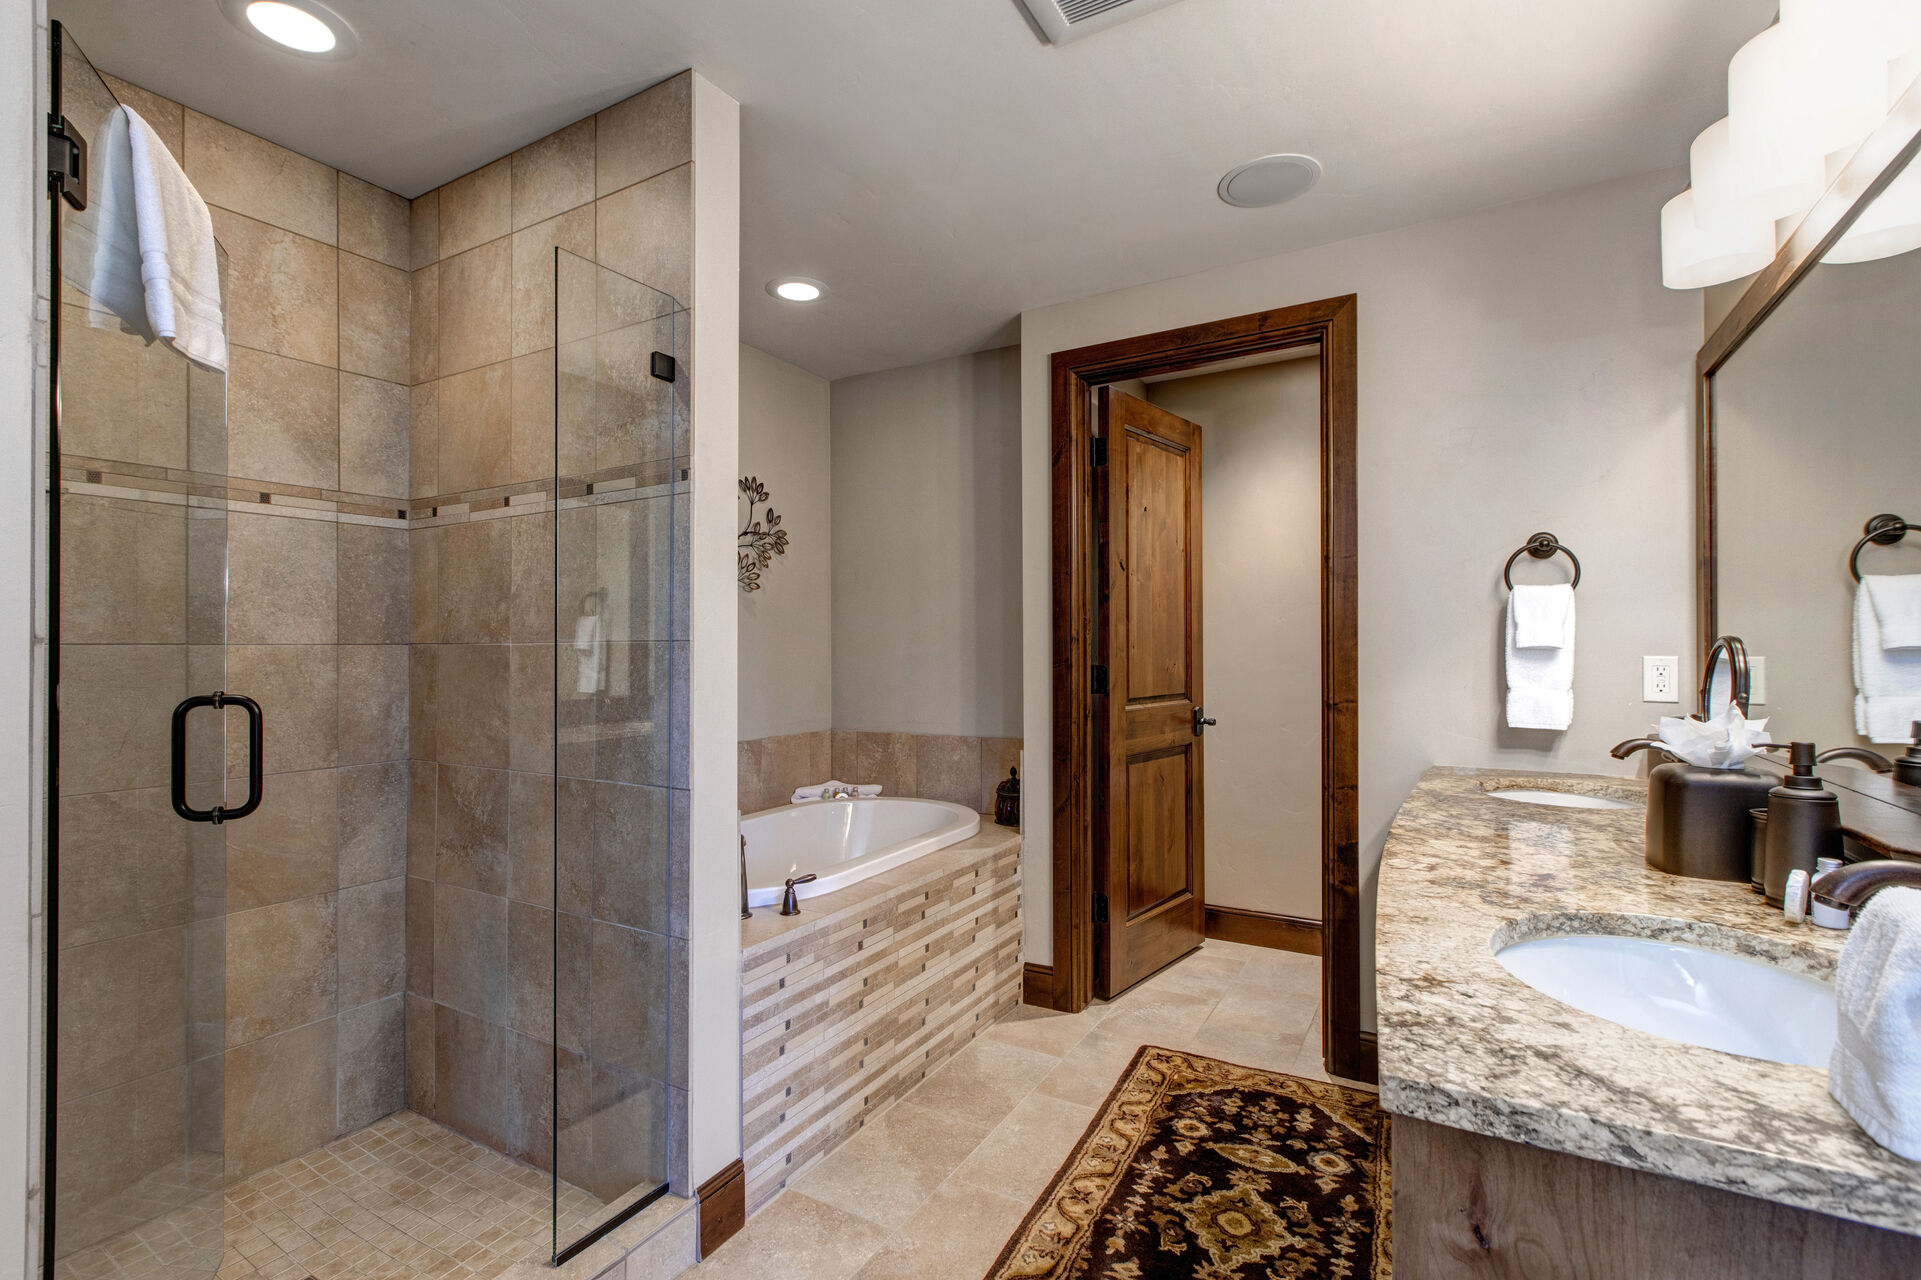 Private Master Bathroom with Jetted Tub, Large Tiled Shower, Dual Sinks, and separate wash closet